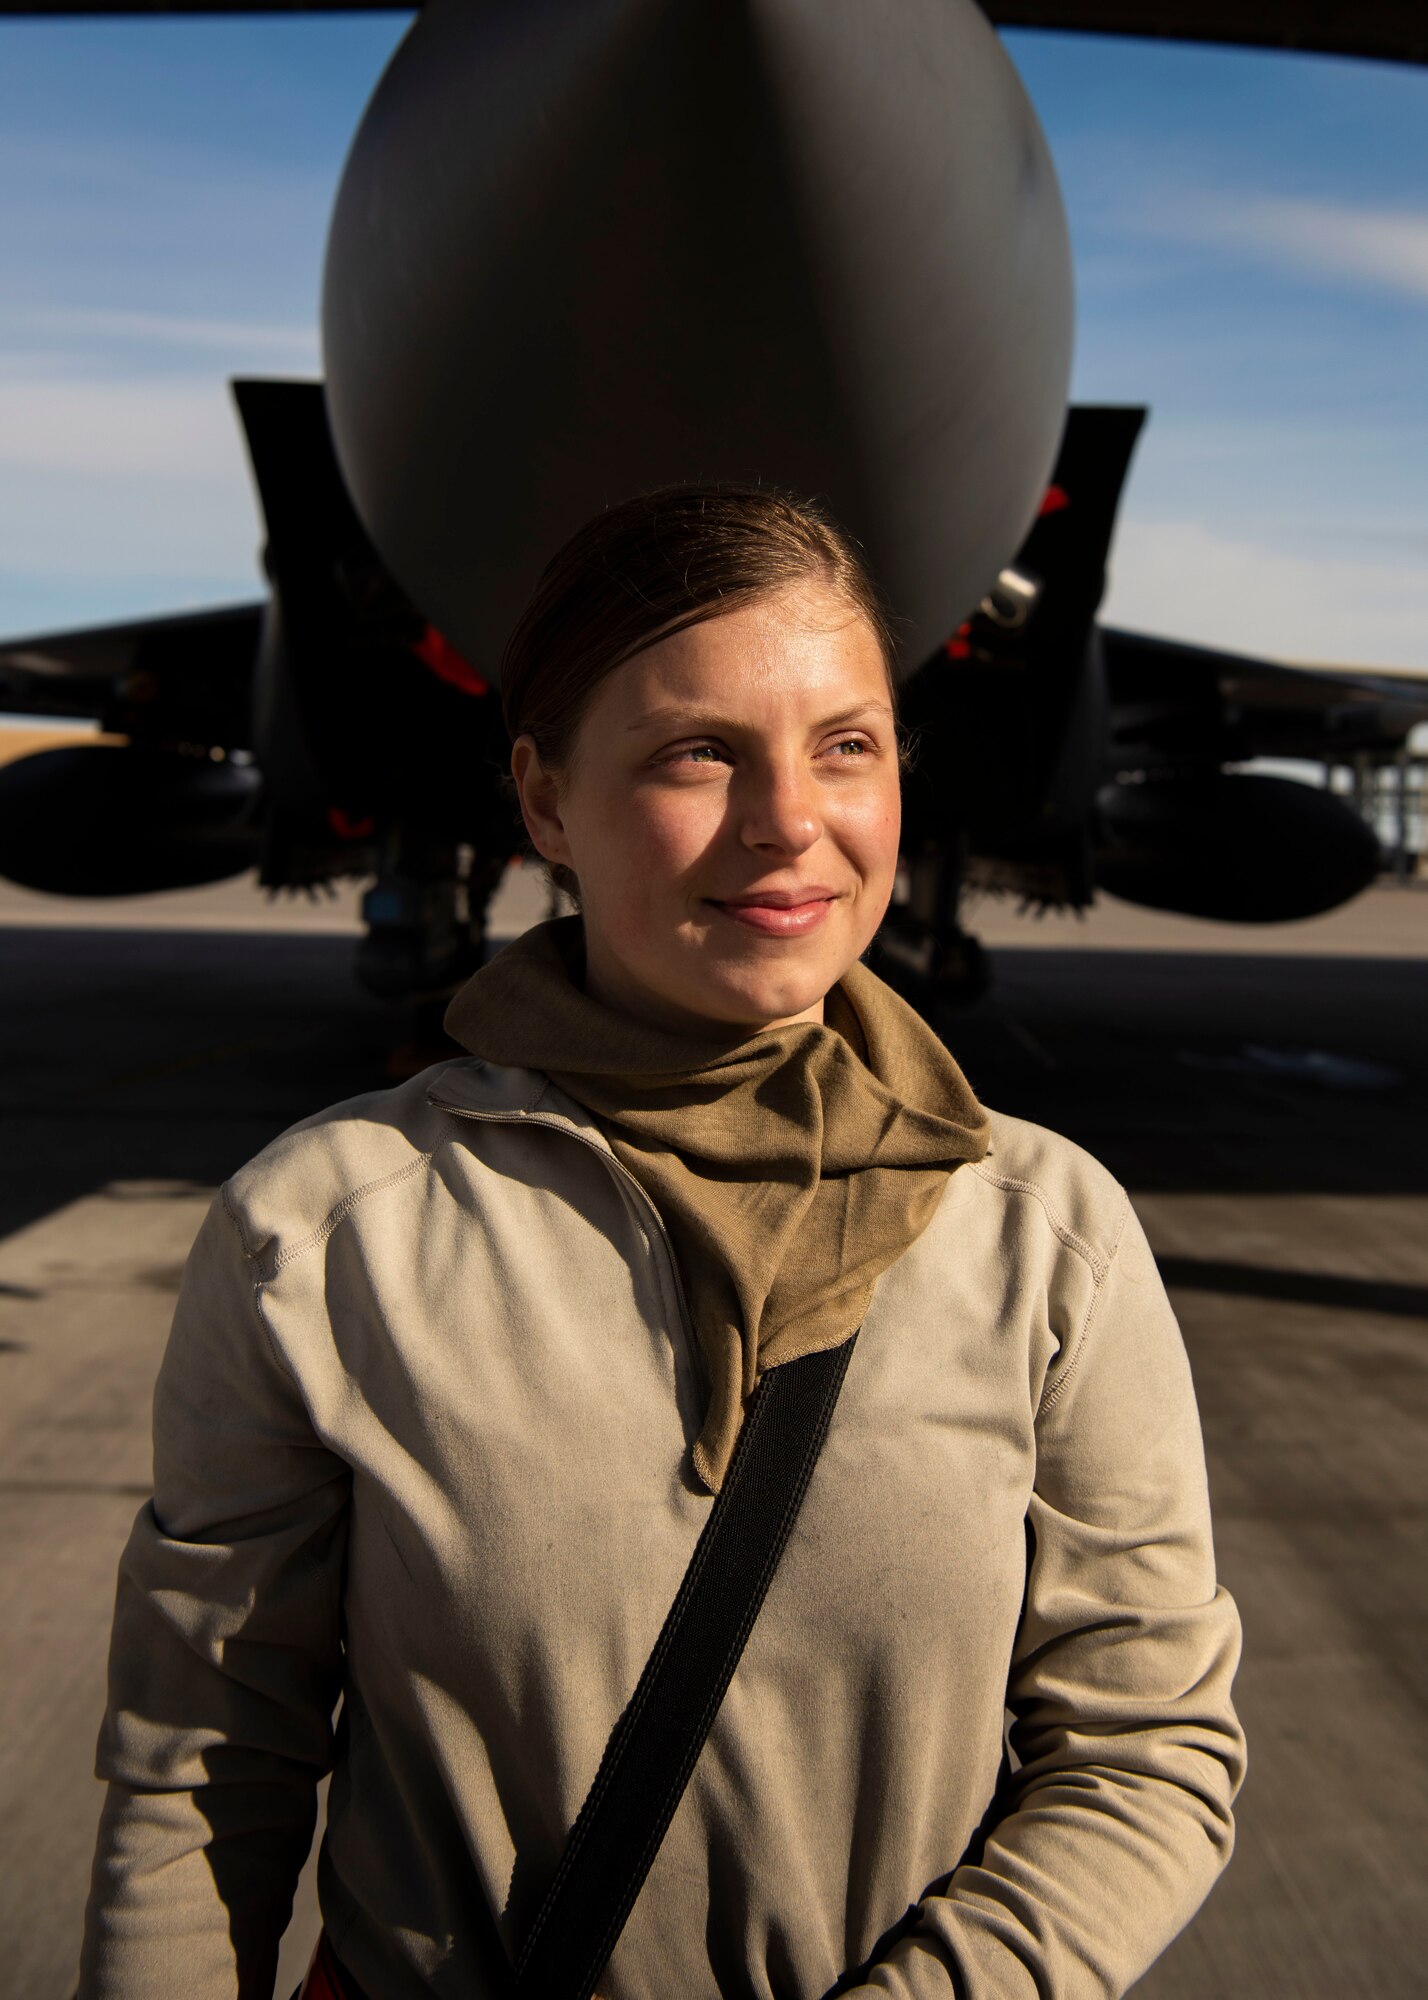 U.S. Air Force Airman 1st Class Kristin Lyons, 391st Fighter Squadron crew chief, stands by an F-15E Strike Eagle at the end of a 12-hour shift, April 14, 2020, at Mountain Home Air Force Base, Idaho. To increase safety of Airmen during the COVID-19 pandemic, the 391st FS has divided into teams, created an adjusted schedule and implemented CDC safety measures. (U.S. Air Force photo by Airman 1st Class Andrew Kobialka)